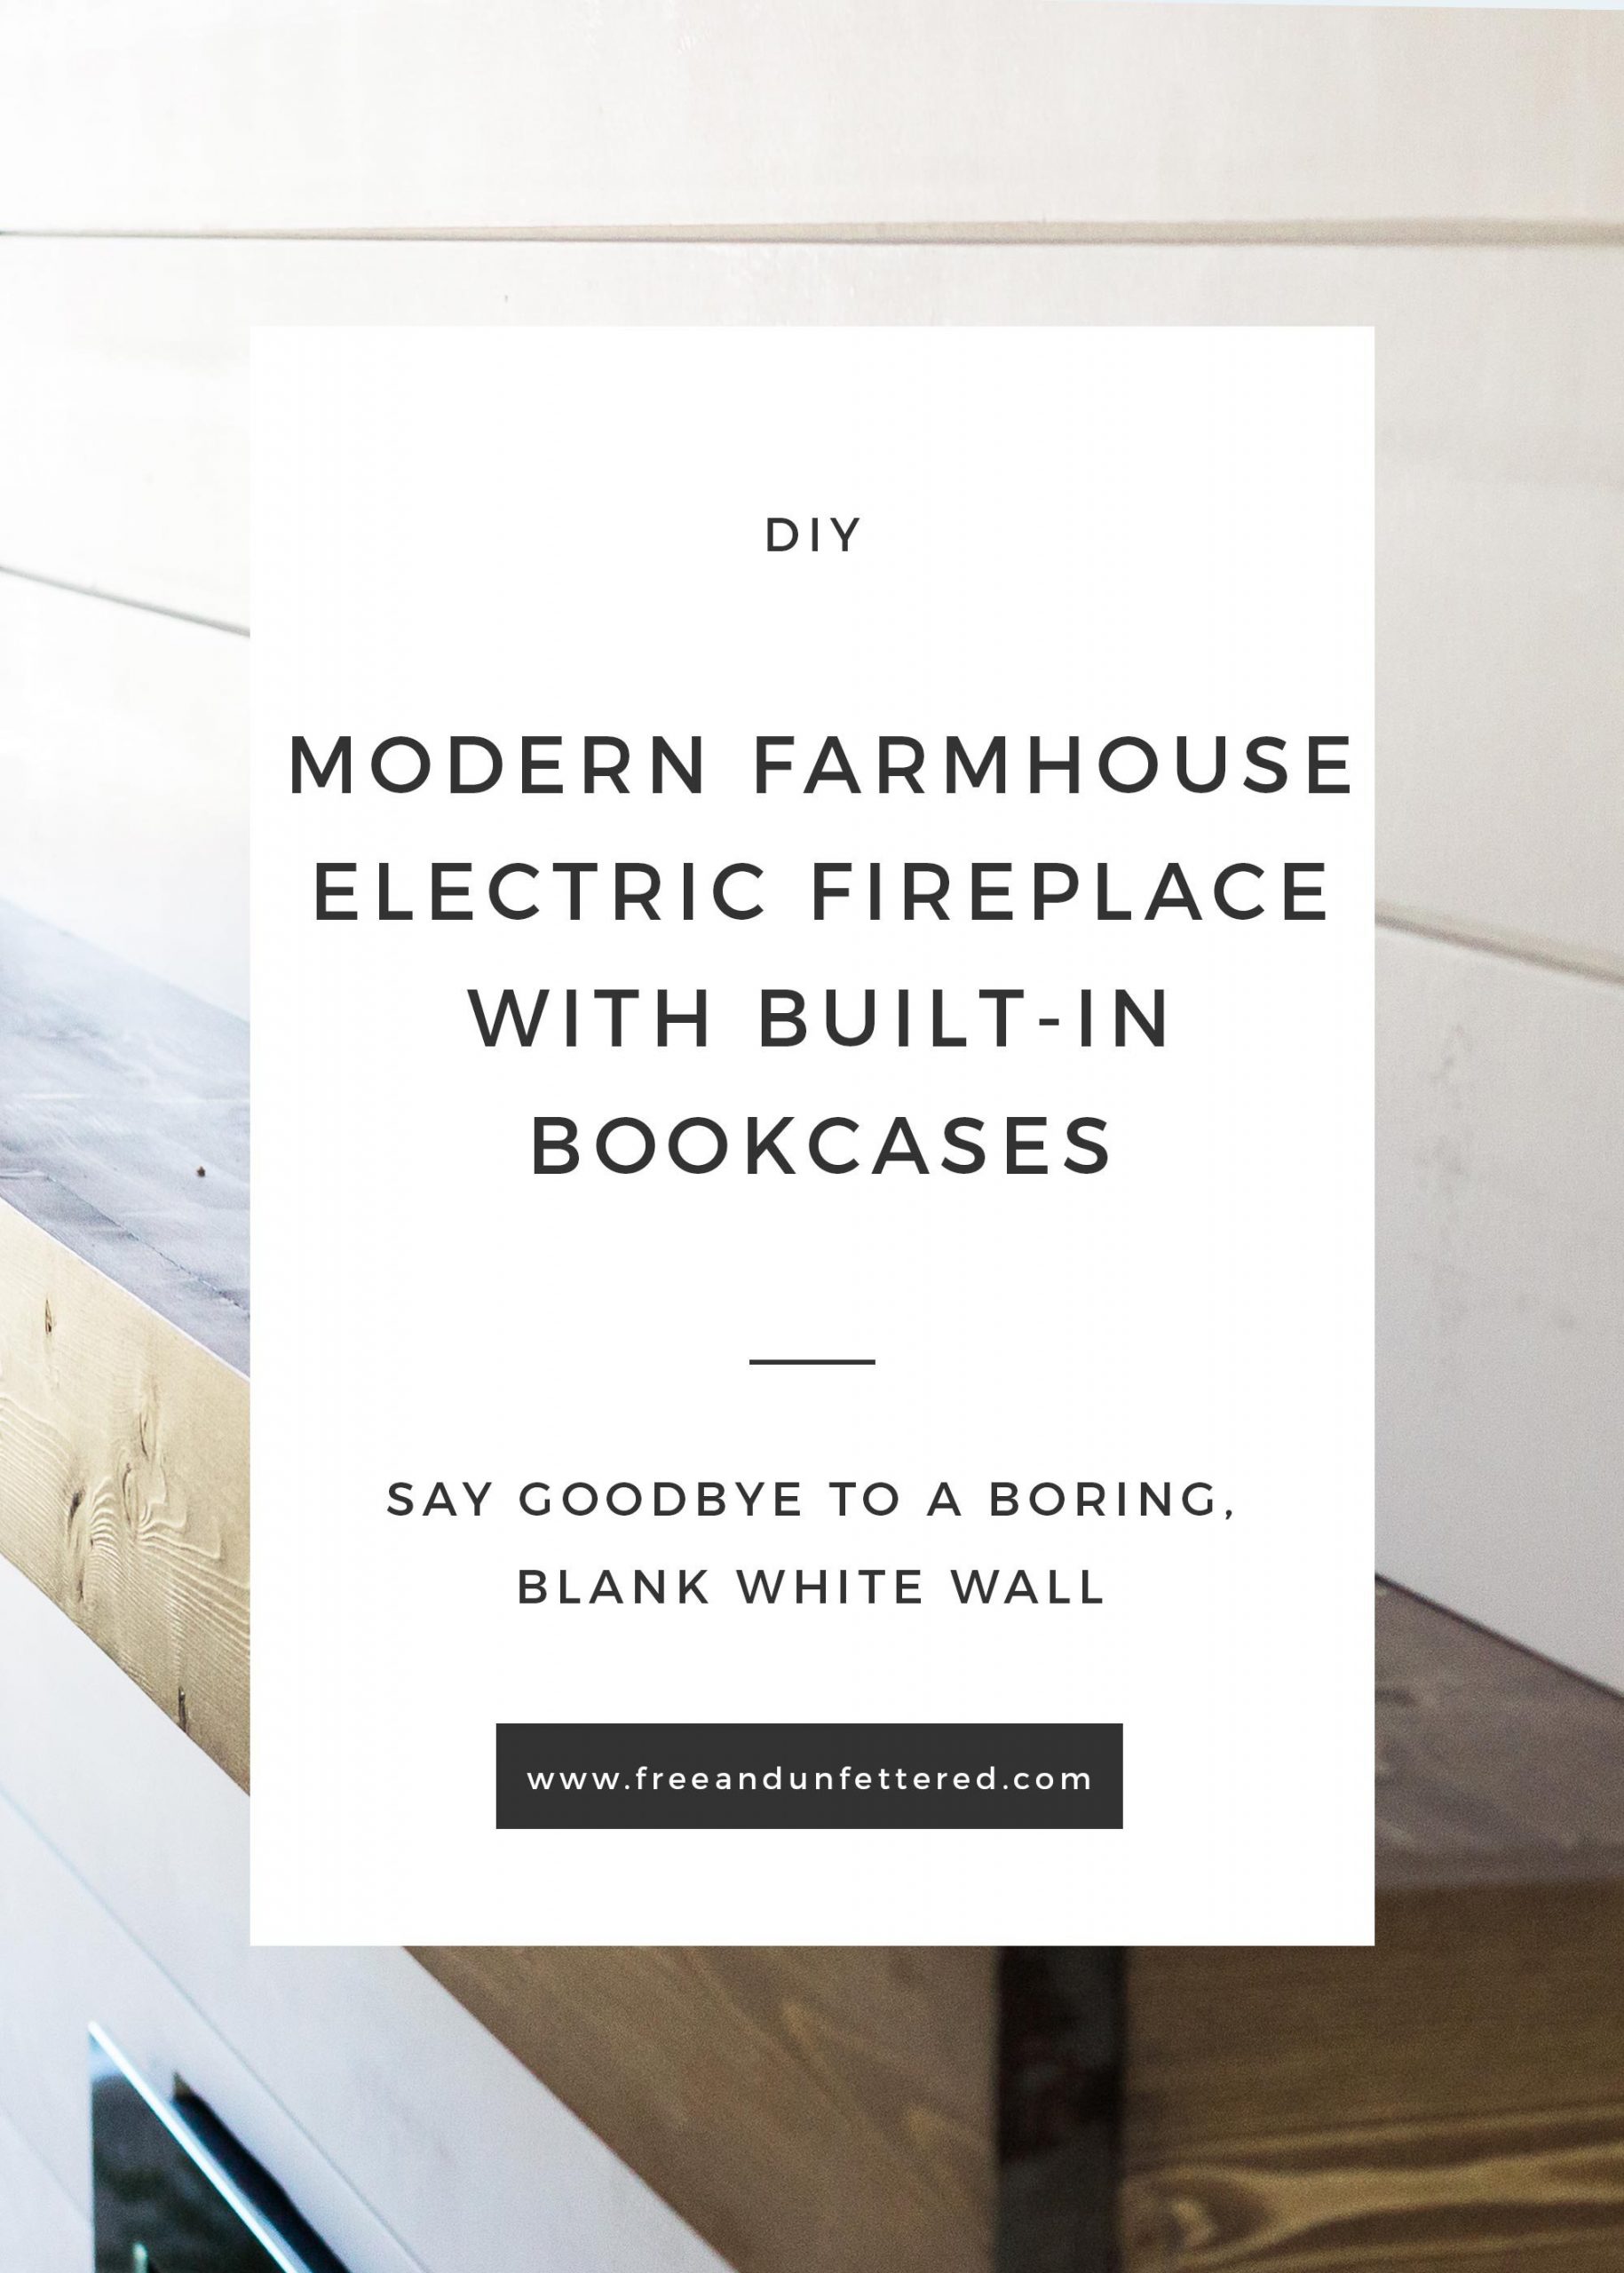 Fireplace Mantel Mounting Hardware Fresh Diy Electric Fireplace with Built In Bookshelves